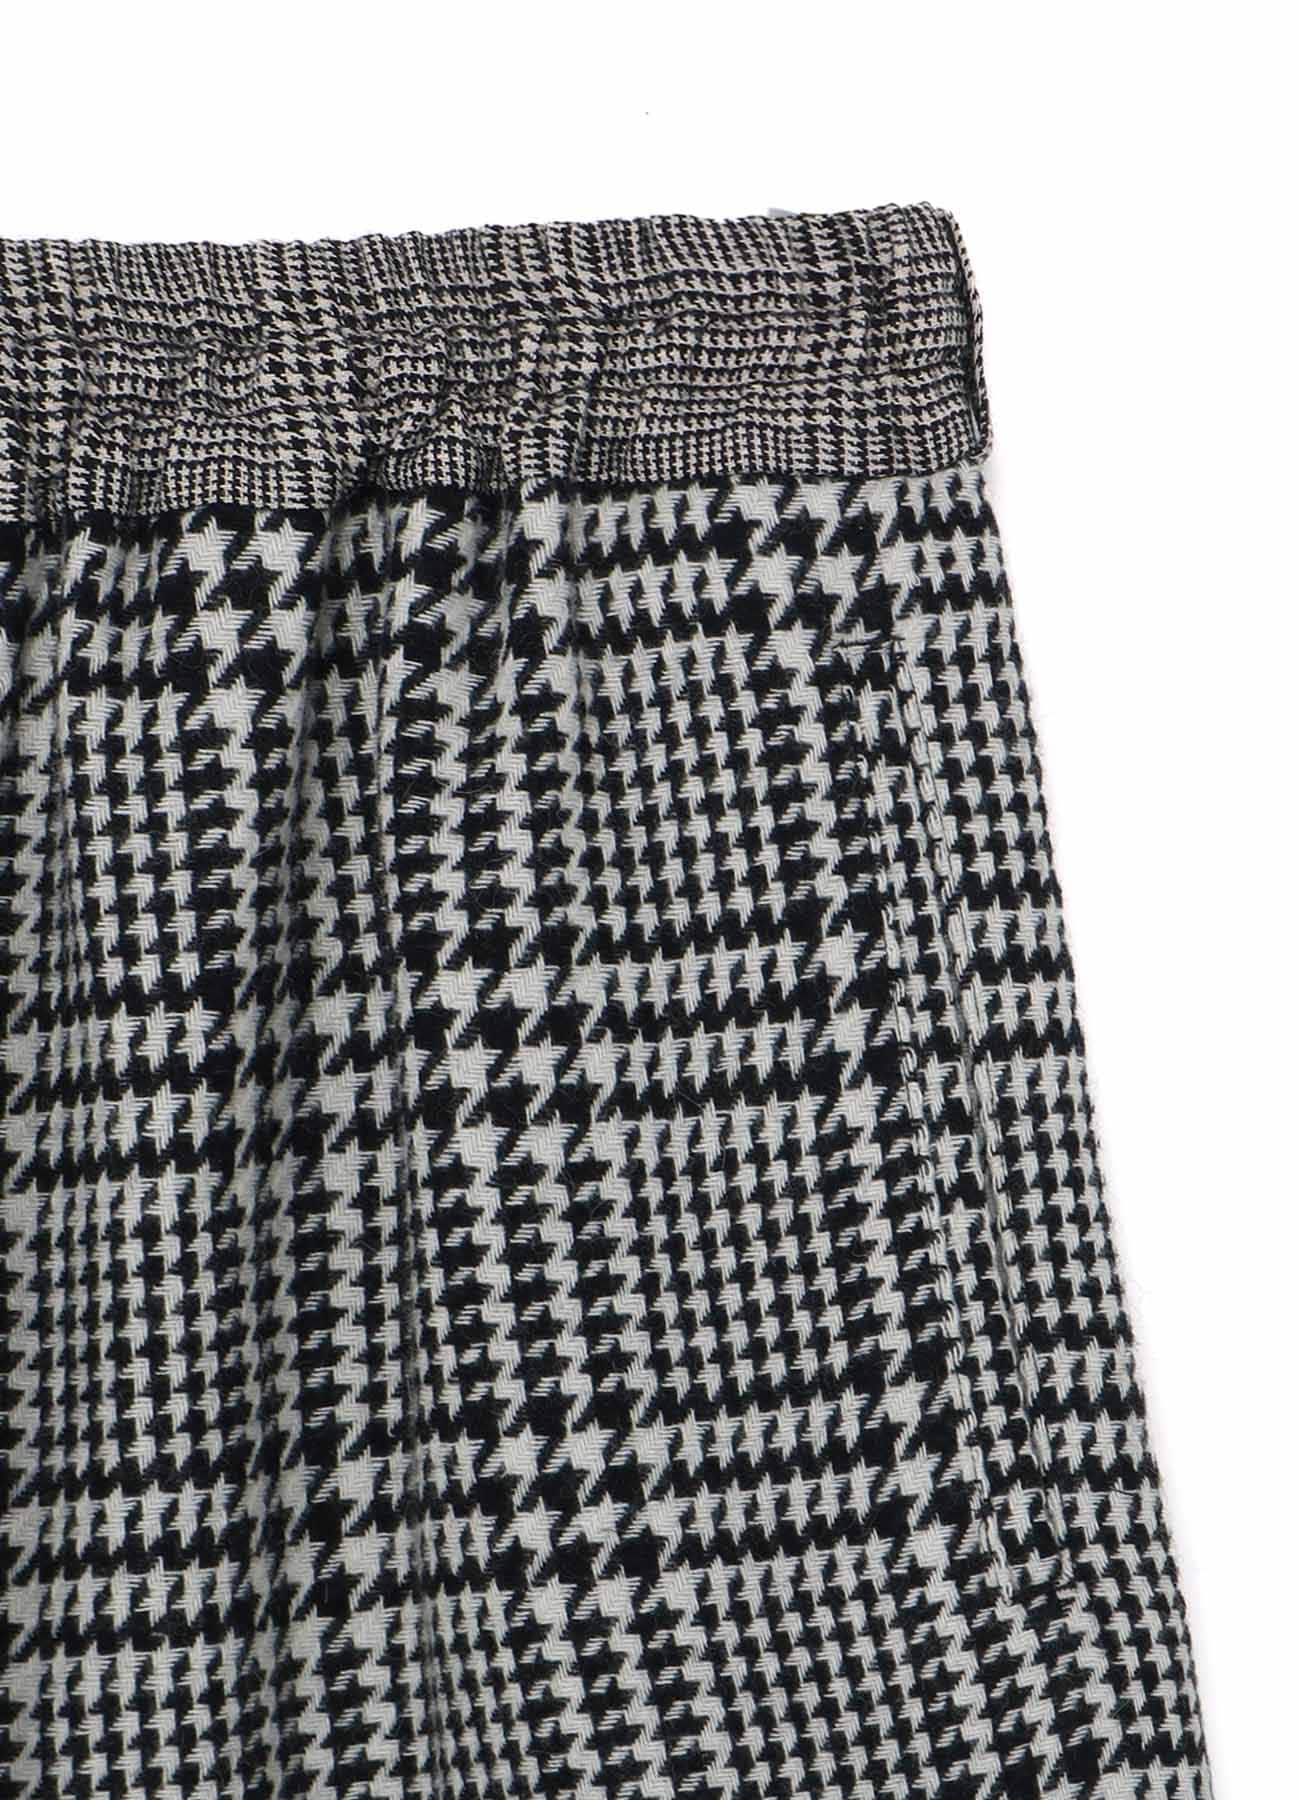 CRAZY CHECK MULTI-MATERIAL SWITCHING 7/10 LENGTH STRING PANTS